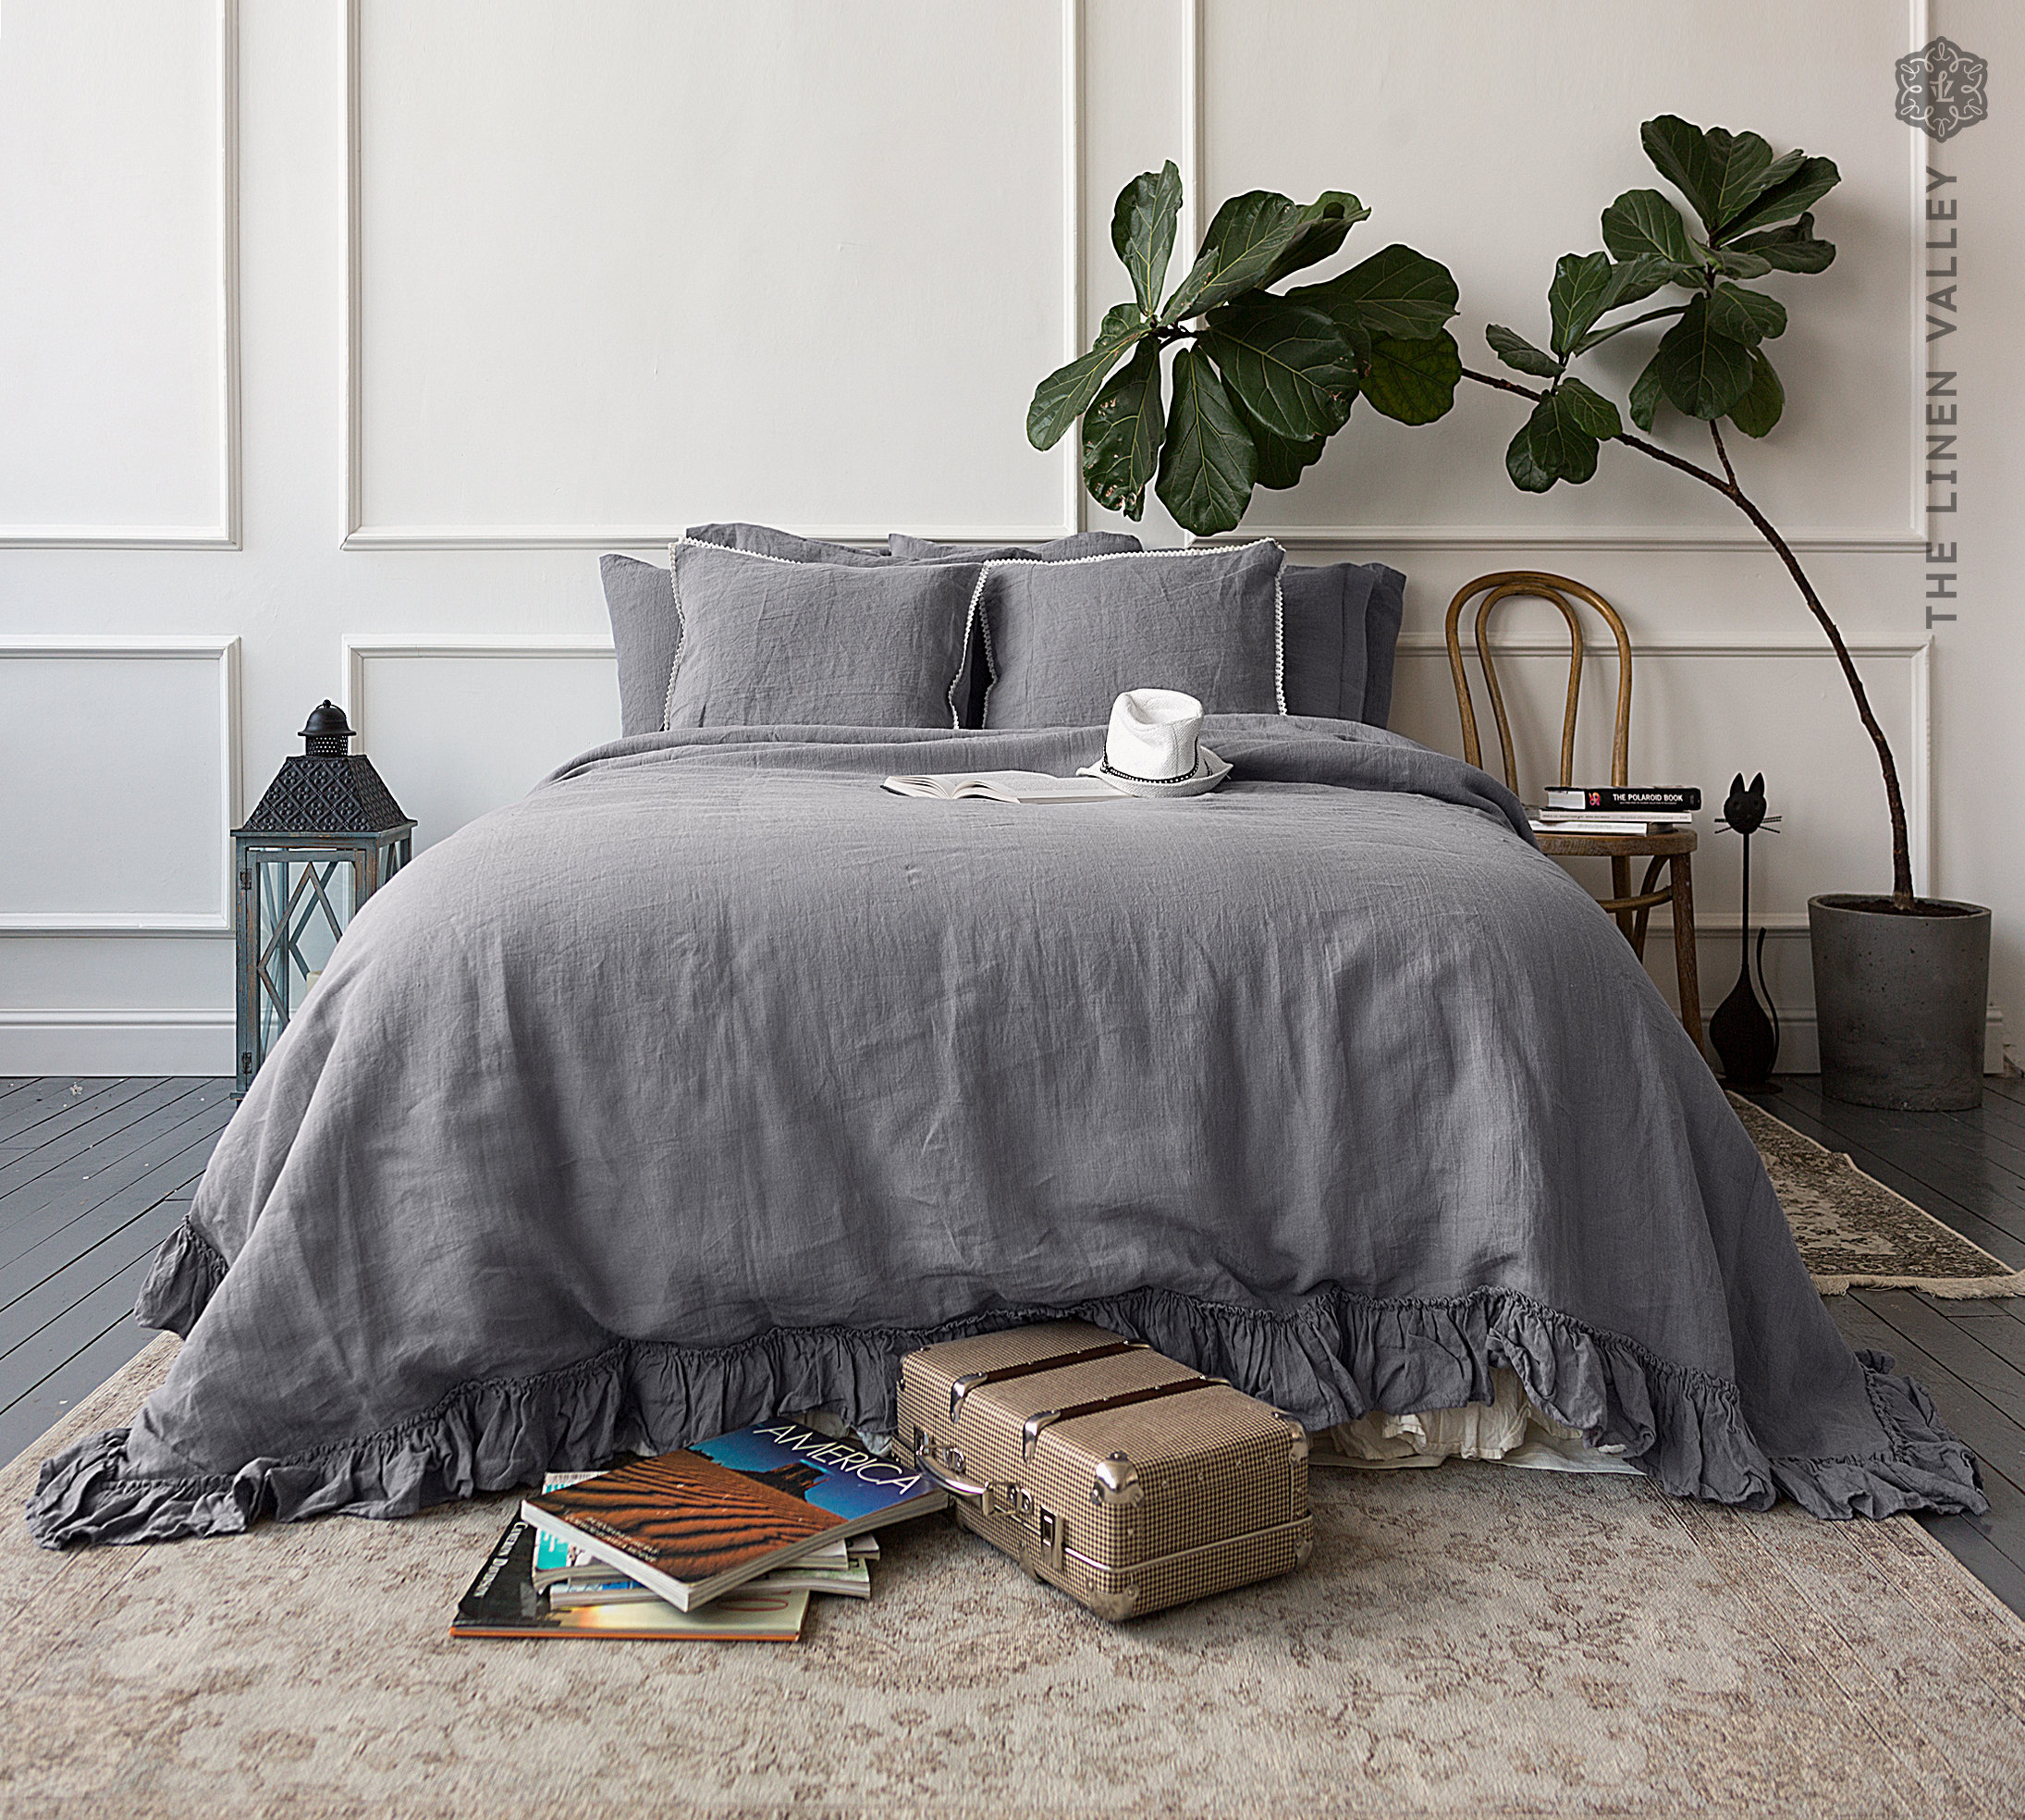 Charcoal Grey Linen Comforter Cover -Shabby Chic Bedding-Ruffled Charcoal Grey Queen/King Size Doona Cover - Queen